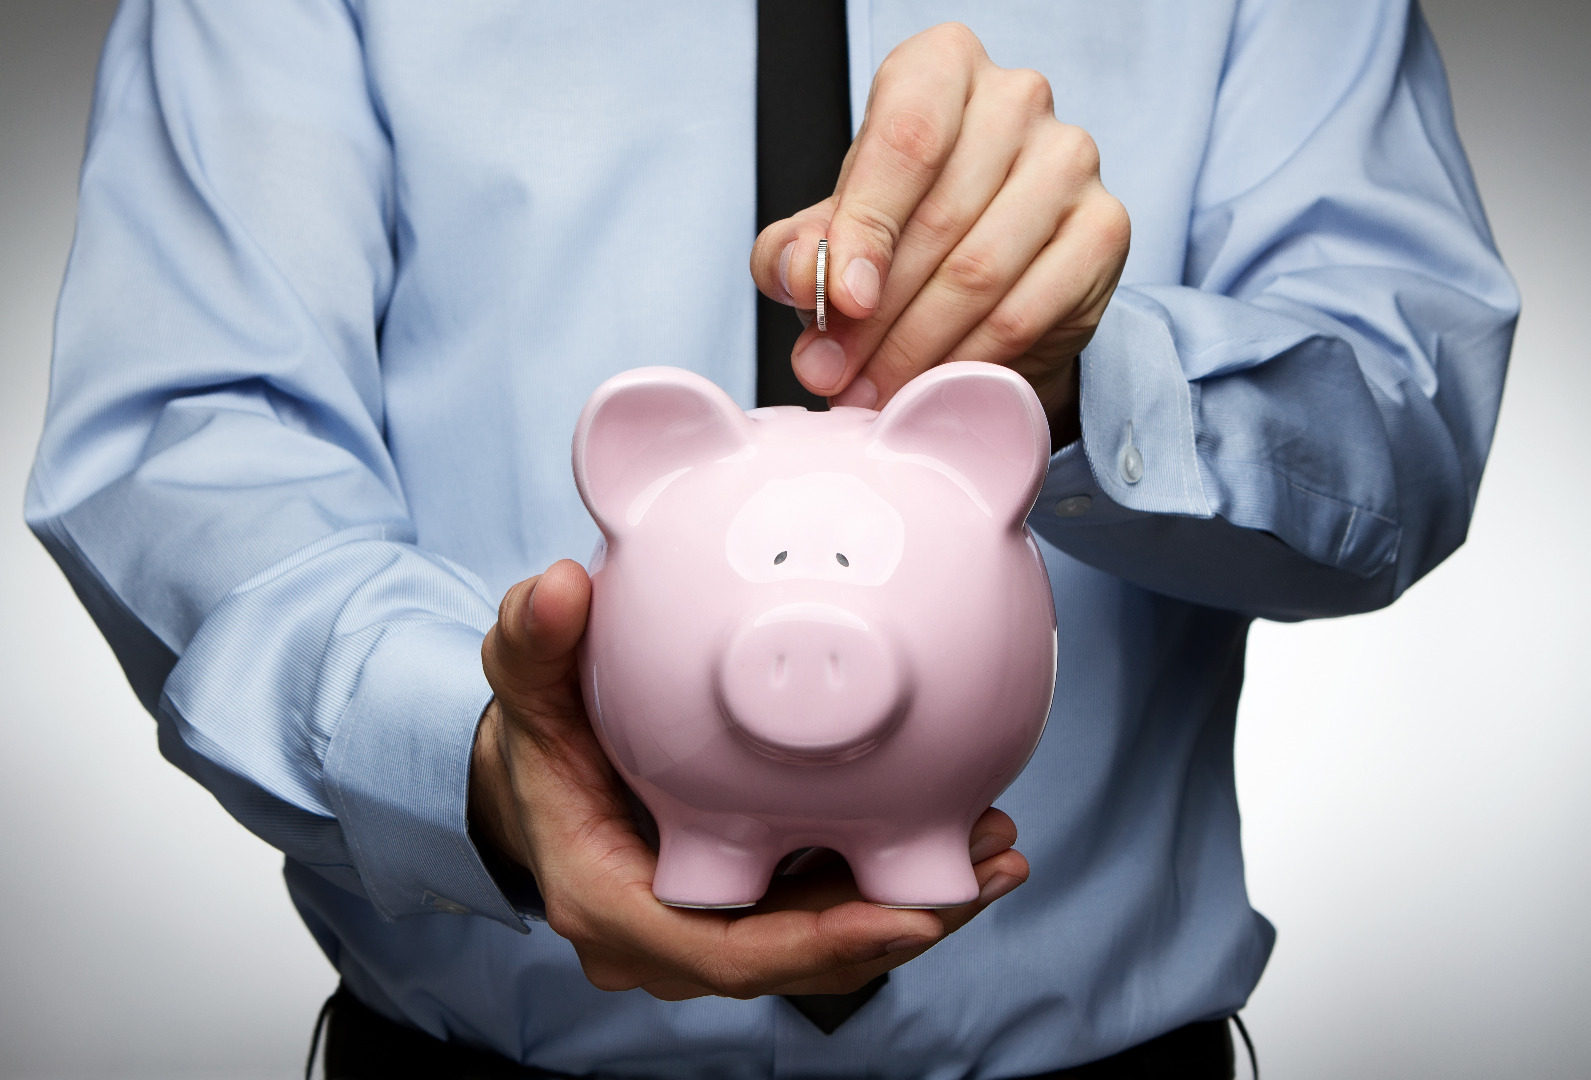 Learn How to Save Money at Your SME